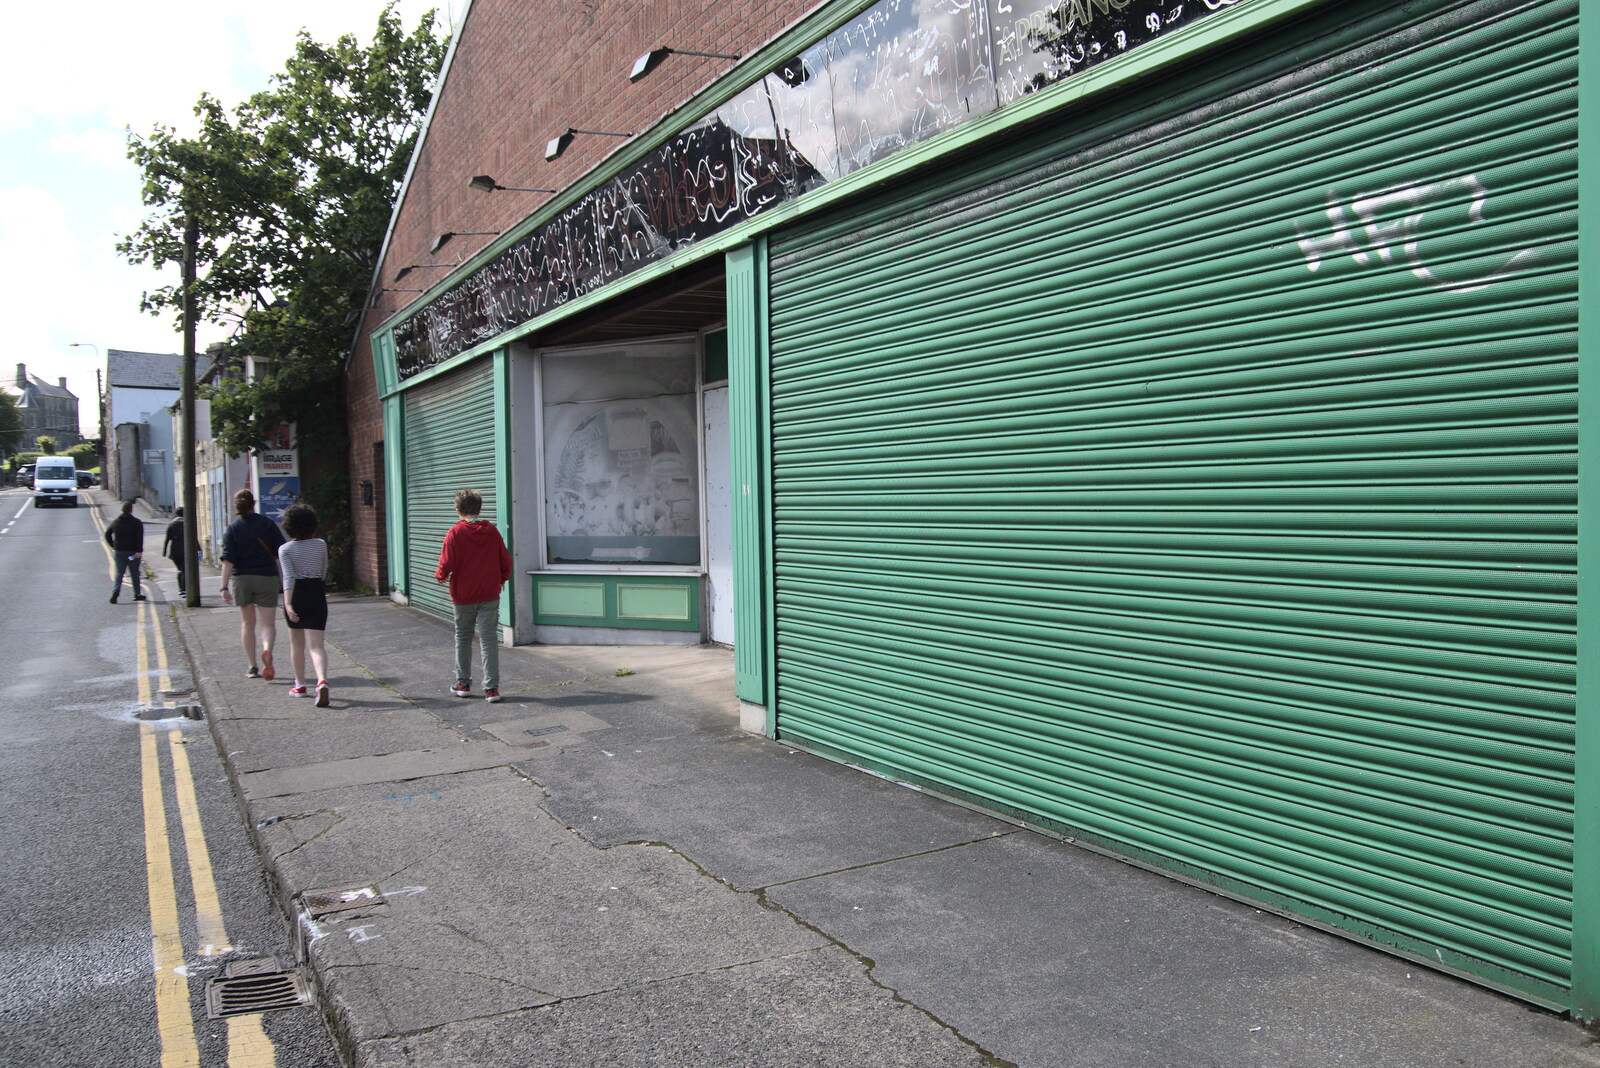 A Trip to Manorhamilton, County Leitrim, Ireland - 11th August 2021: Green shutters on a closed-down shop